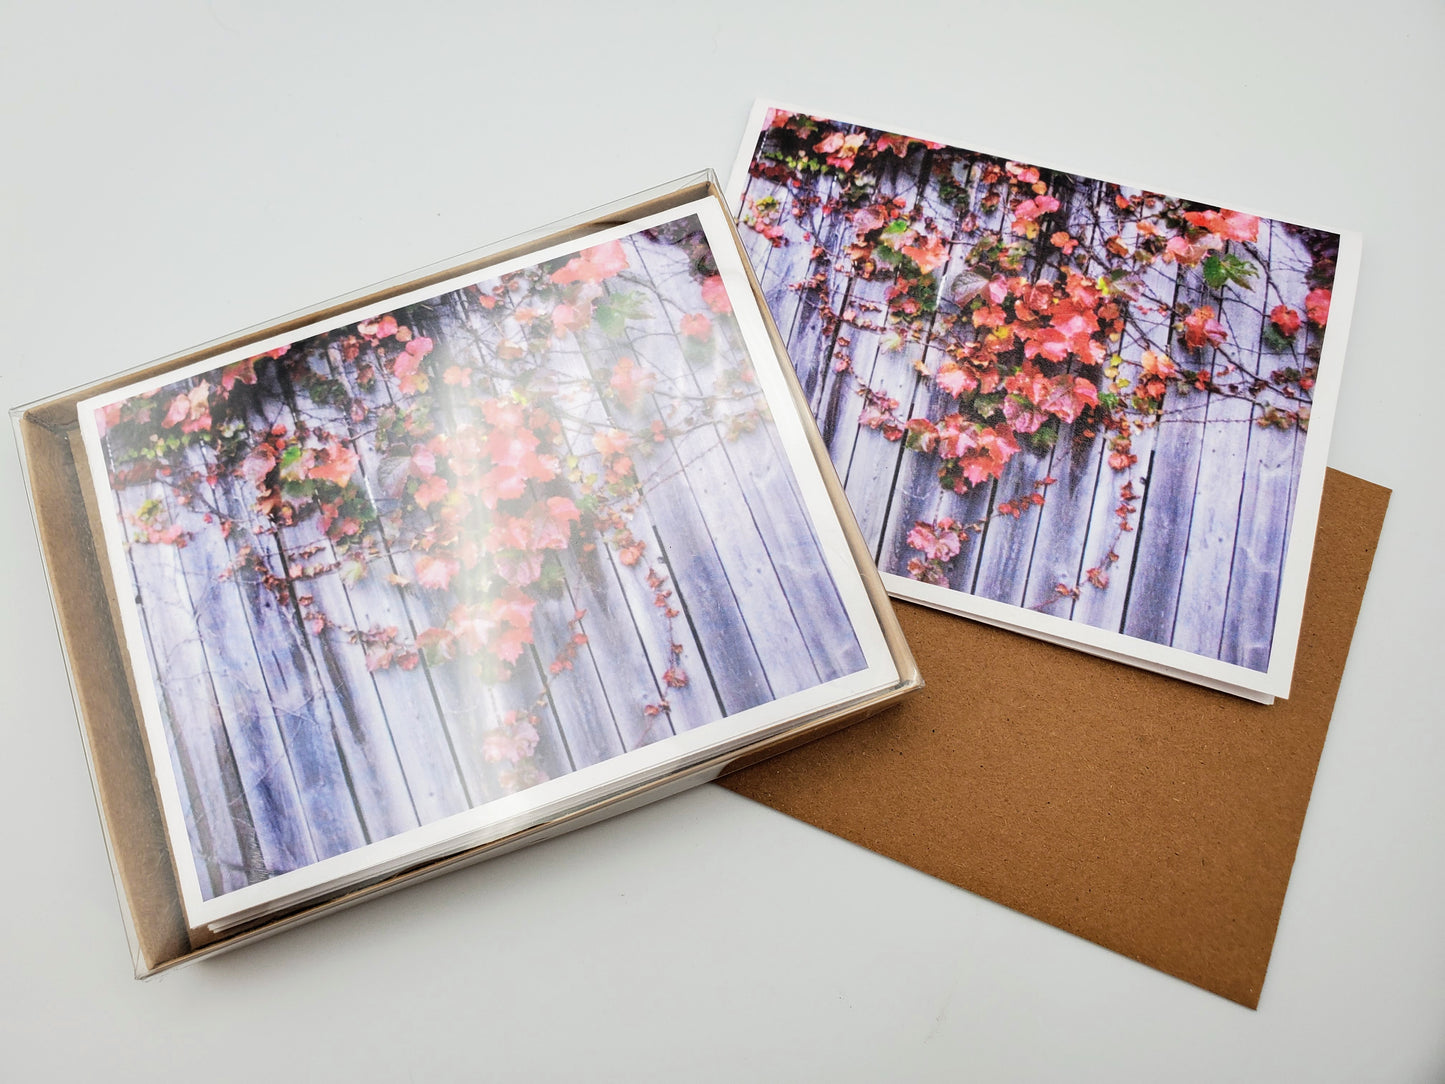 Fall Ivy-Boxed Set of 5 Color Blank Notecards w/Envelopes for Autumn Greetings